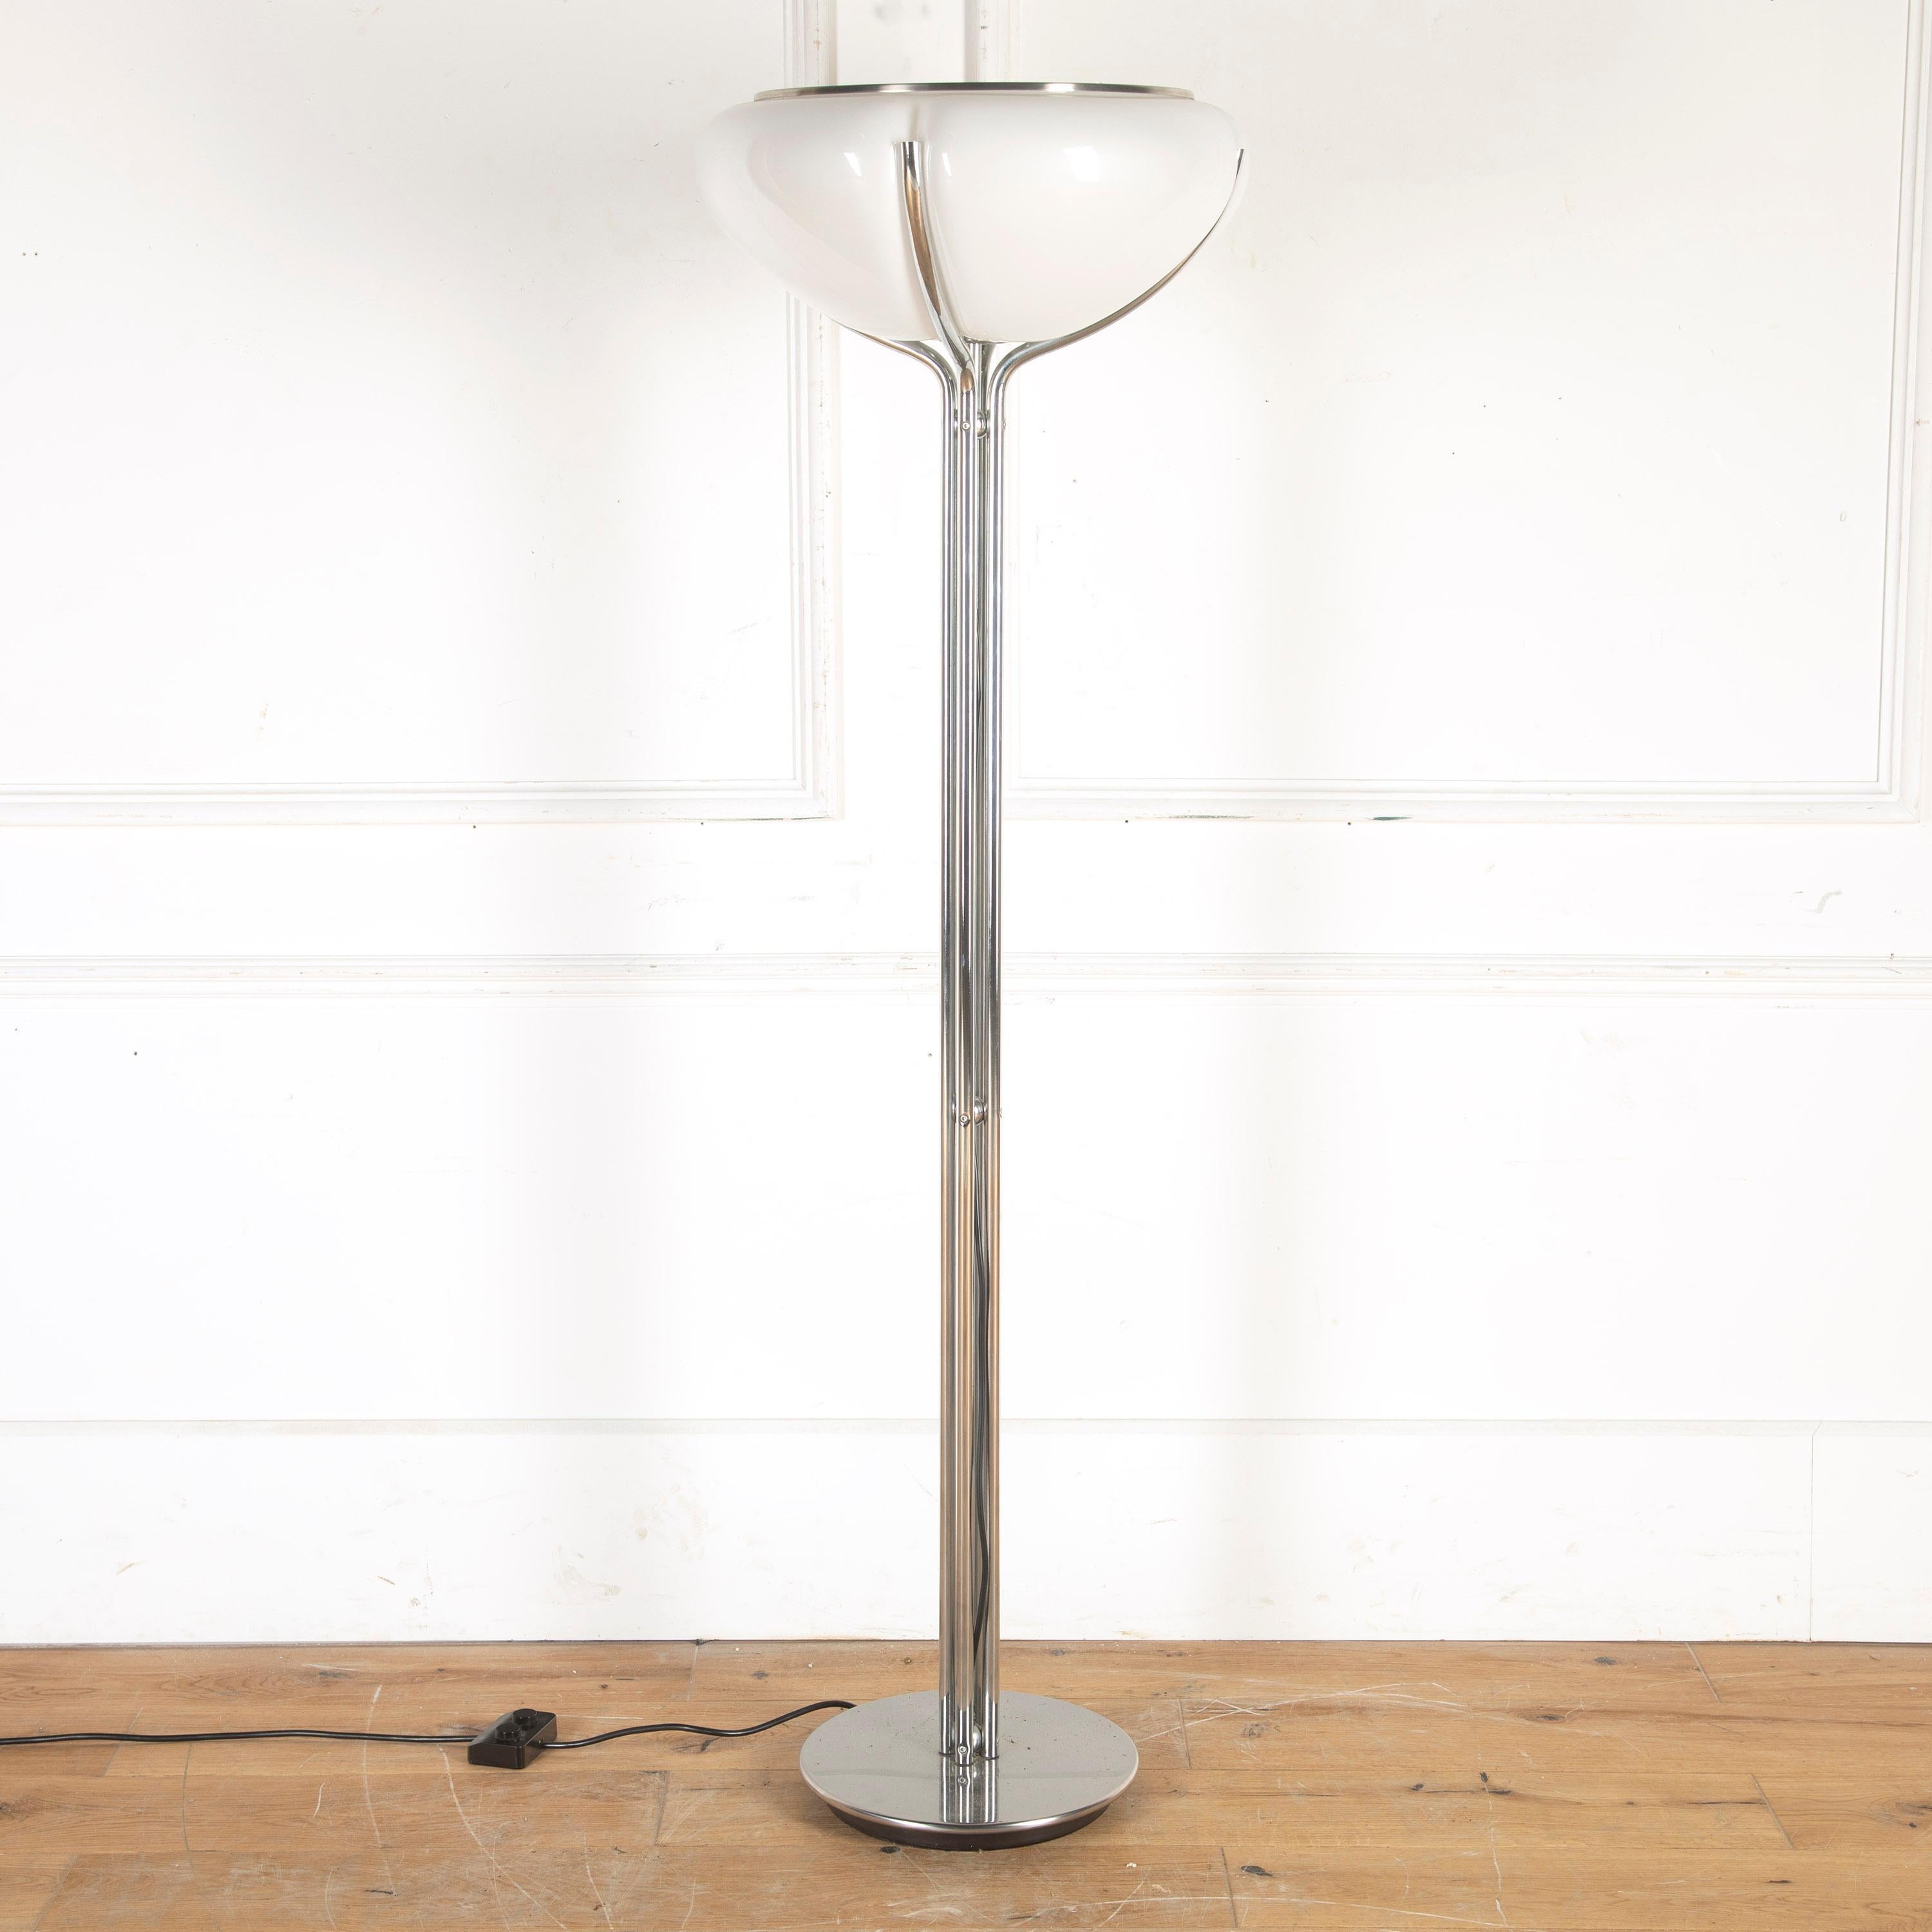 1970s Italian design standard lamp.

This is the 'Quadrifoglio' floor lamp, designed by Luigi Massoni for Harvey Guzzini (Harveiluce I Guzzini).

Constructed in chromed steel and acrylic. This lamp offers two lighting options and can be used as